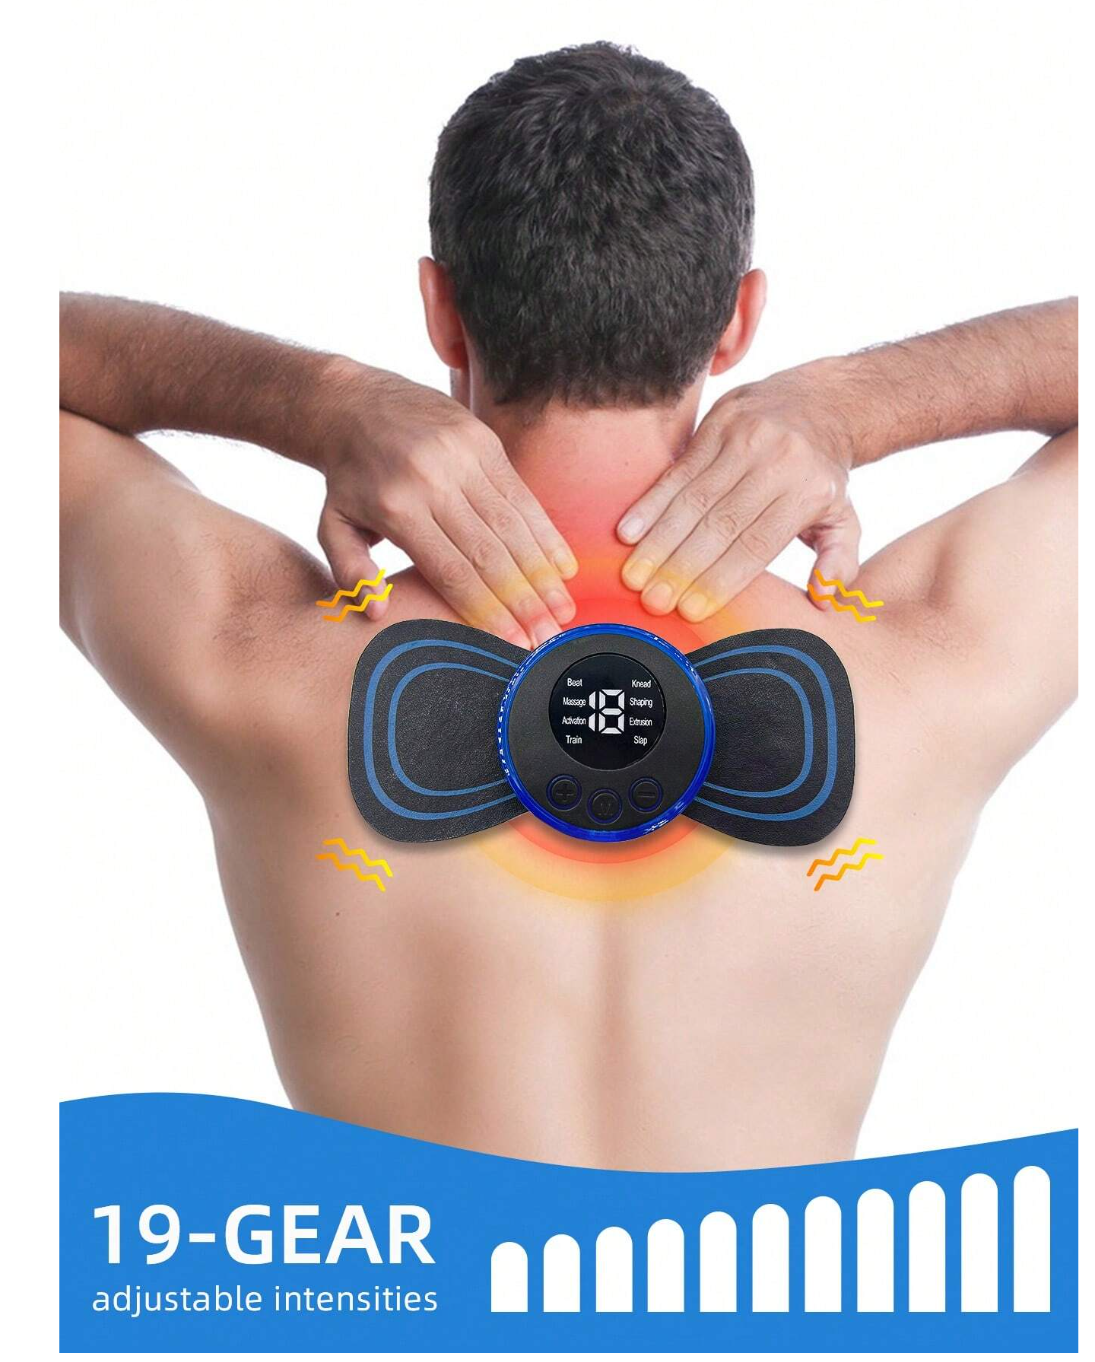 Electrify Your Wellness: Wireless Muscle Stimulator Massager Patch – Smart Fitness for a Soothing Full Body Massage and Pain Relief!